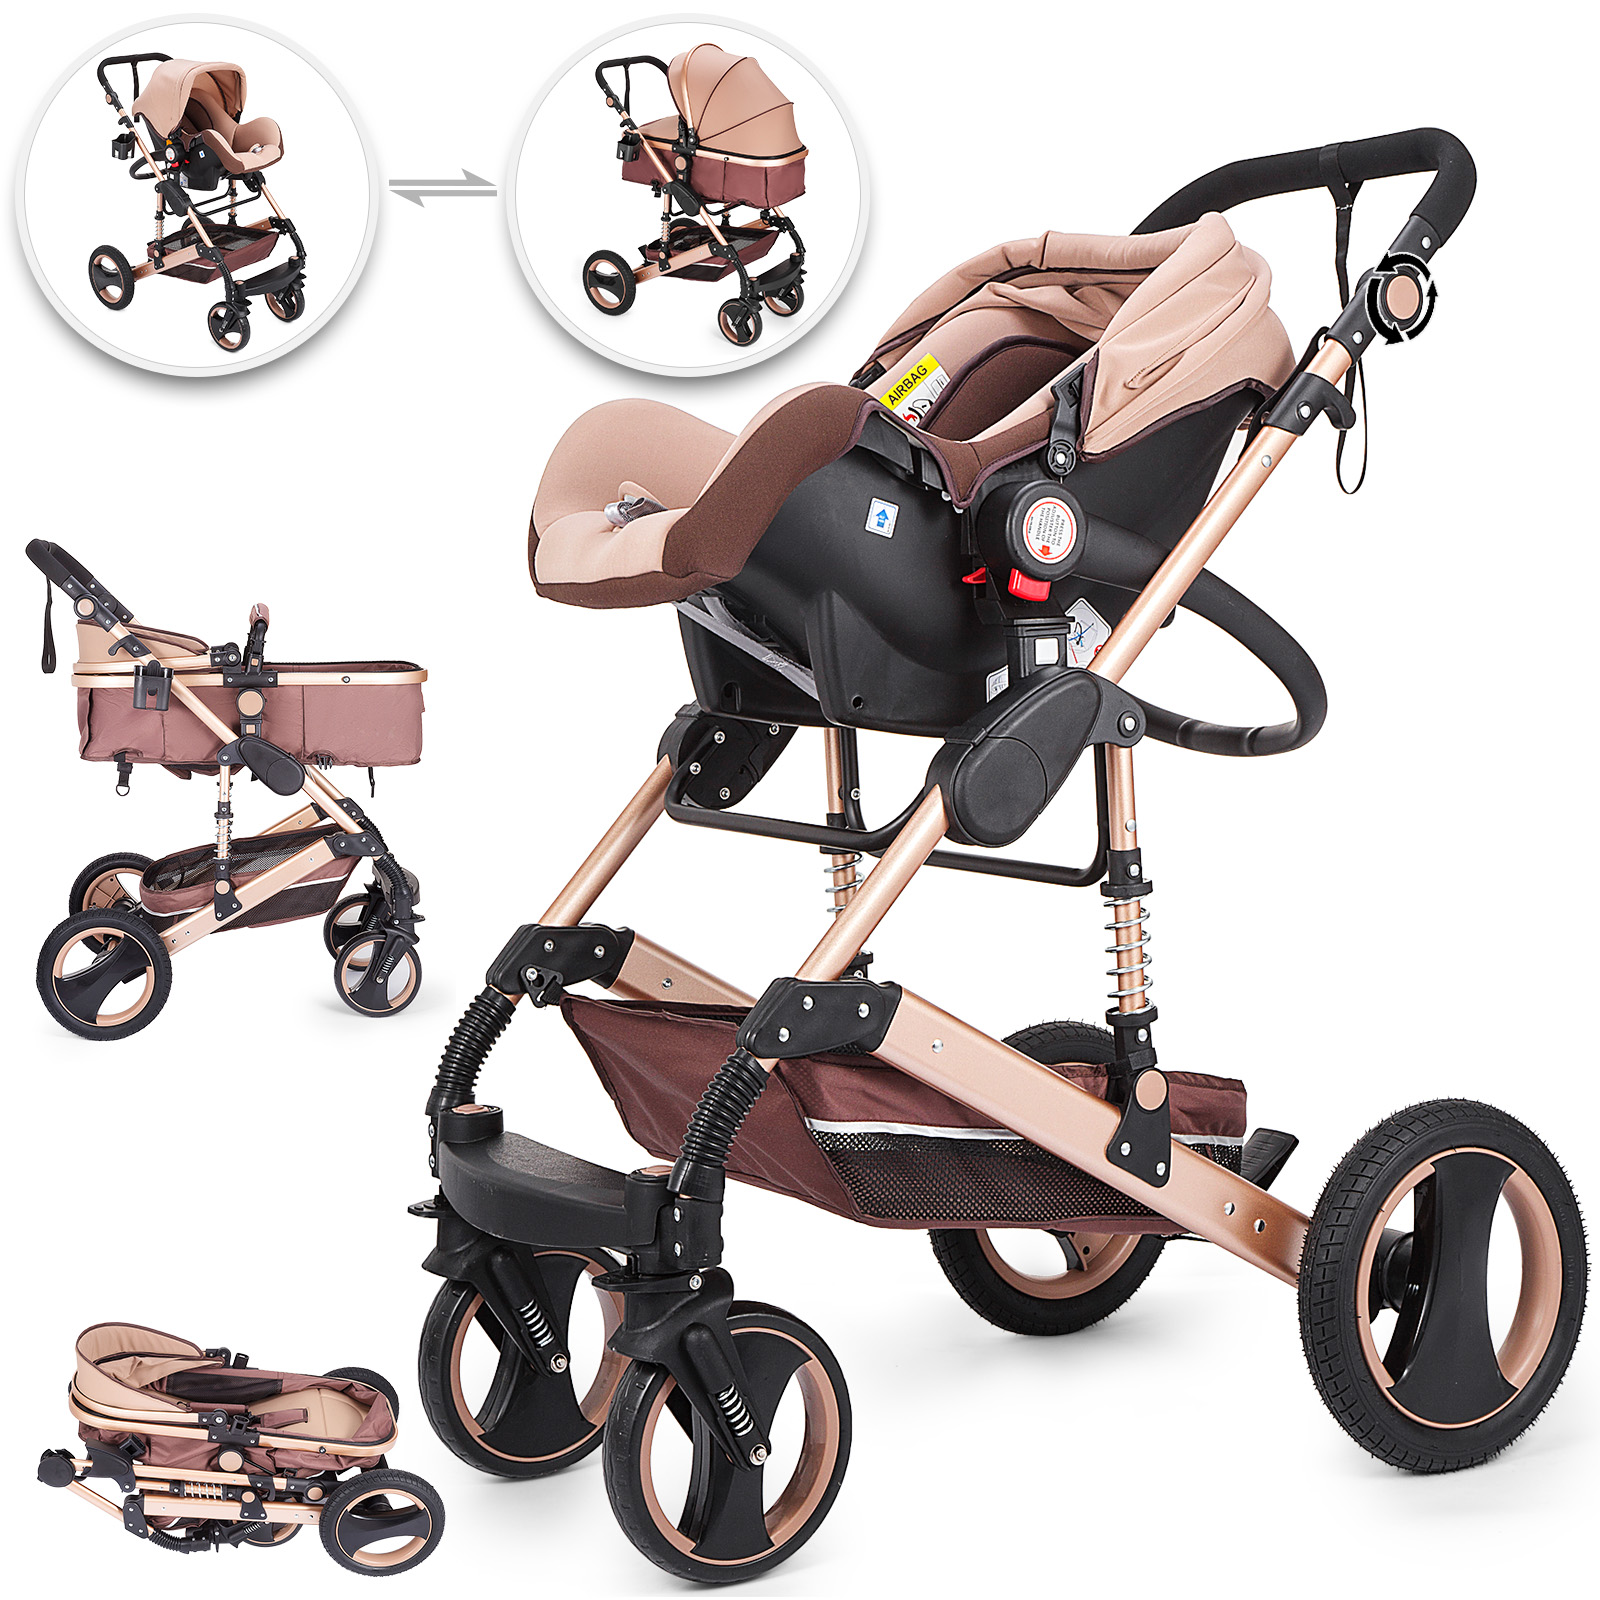 stroller and car seat for newborn